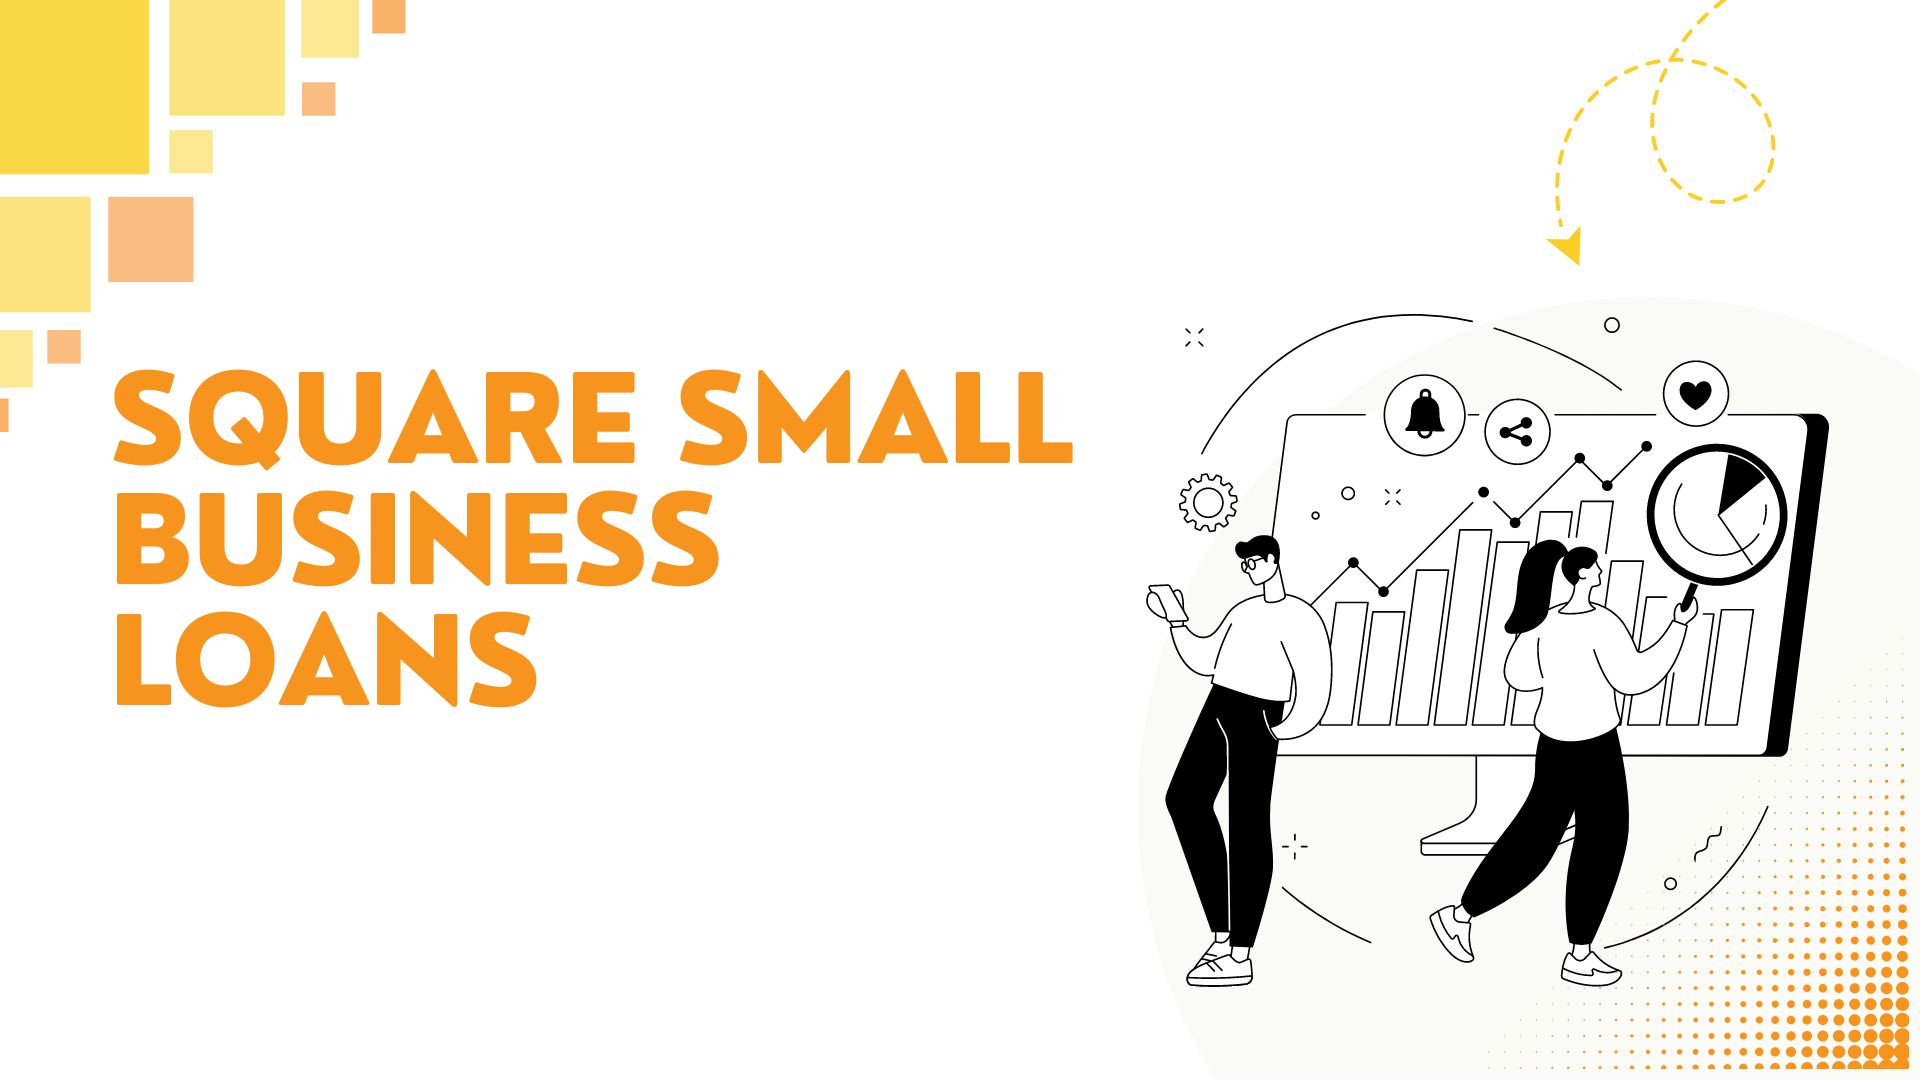 Square Small Business Loans